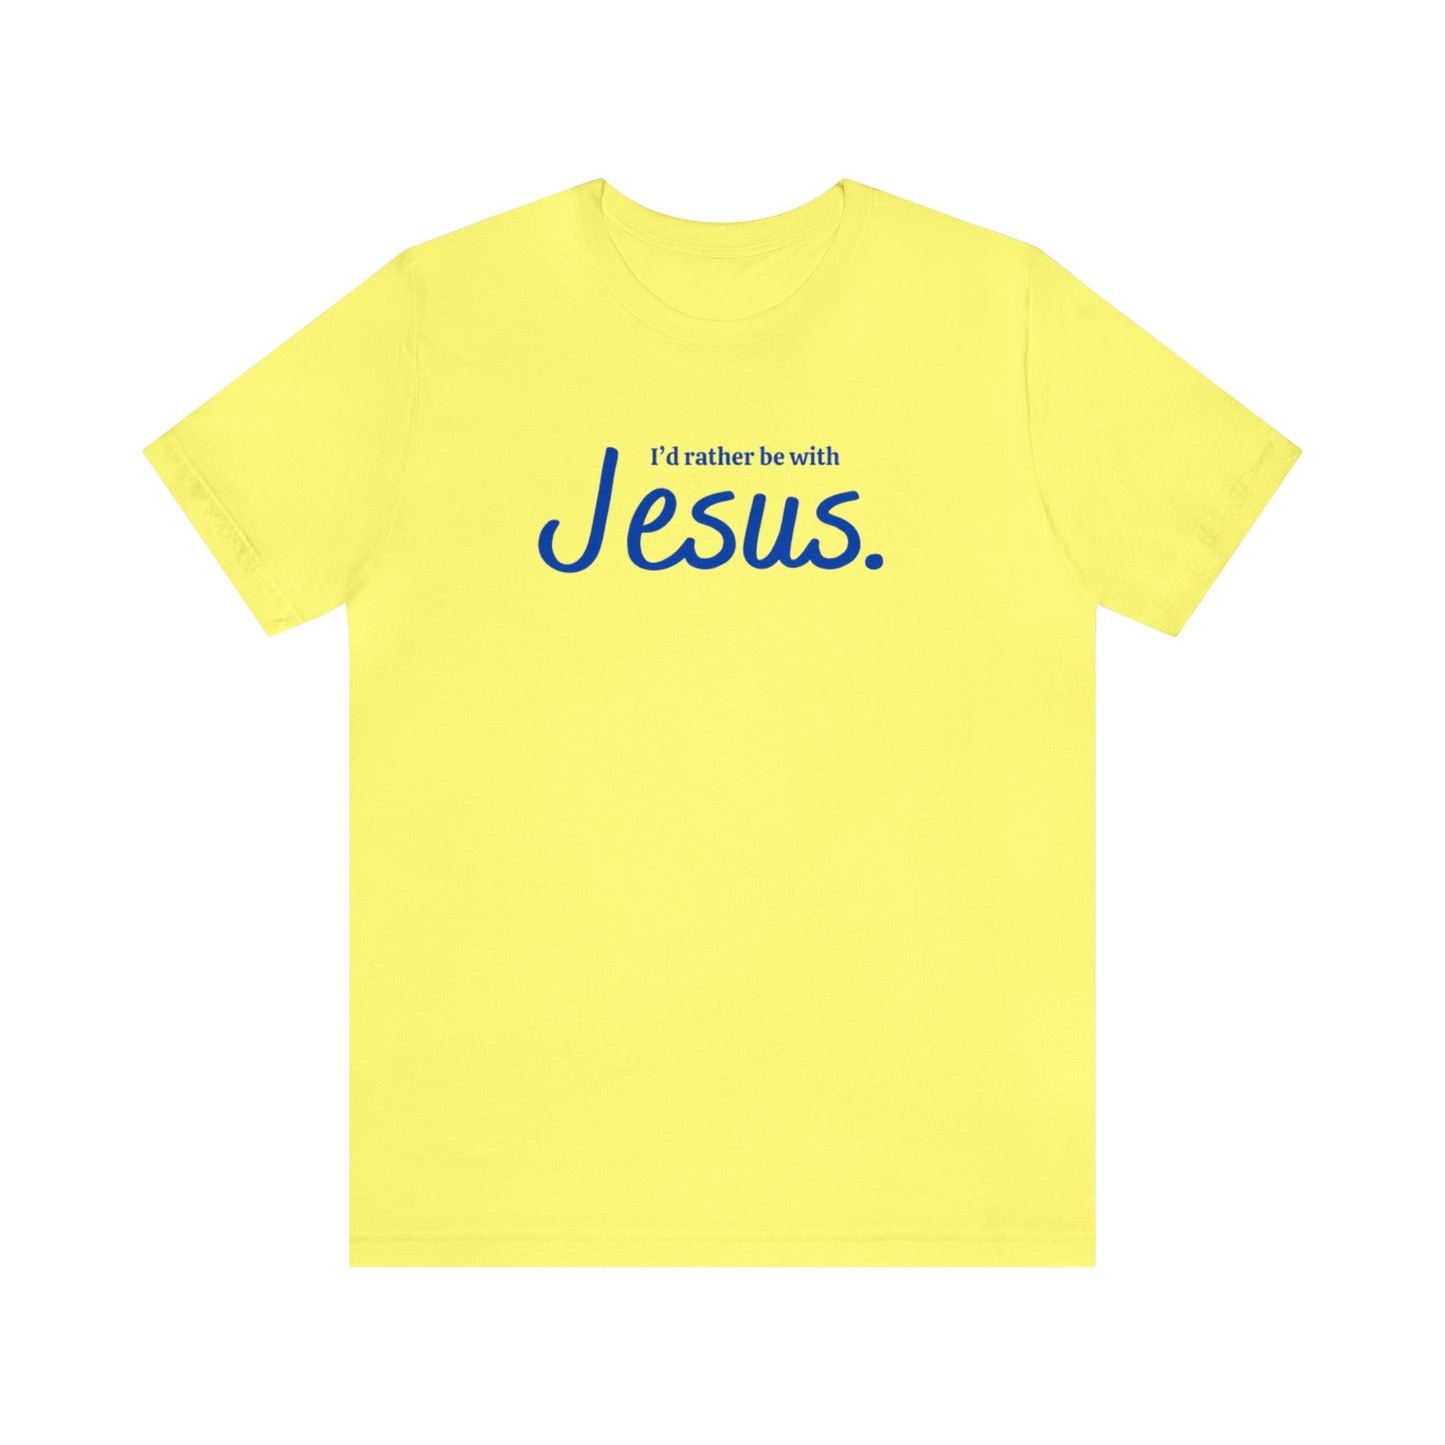 Id rather be with Jesus Unisex Jersey Short Sleeve Tee - White - Silver - Yellow